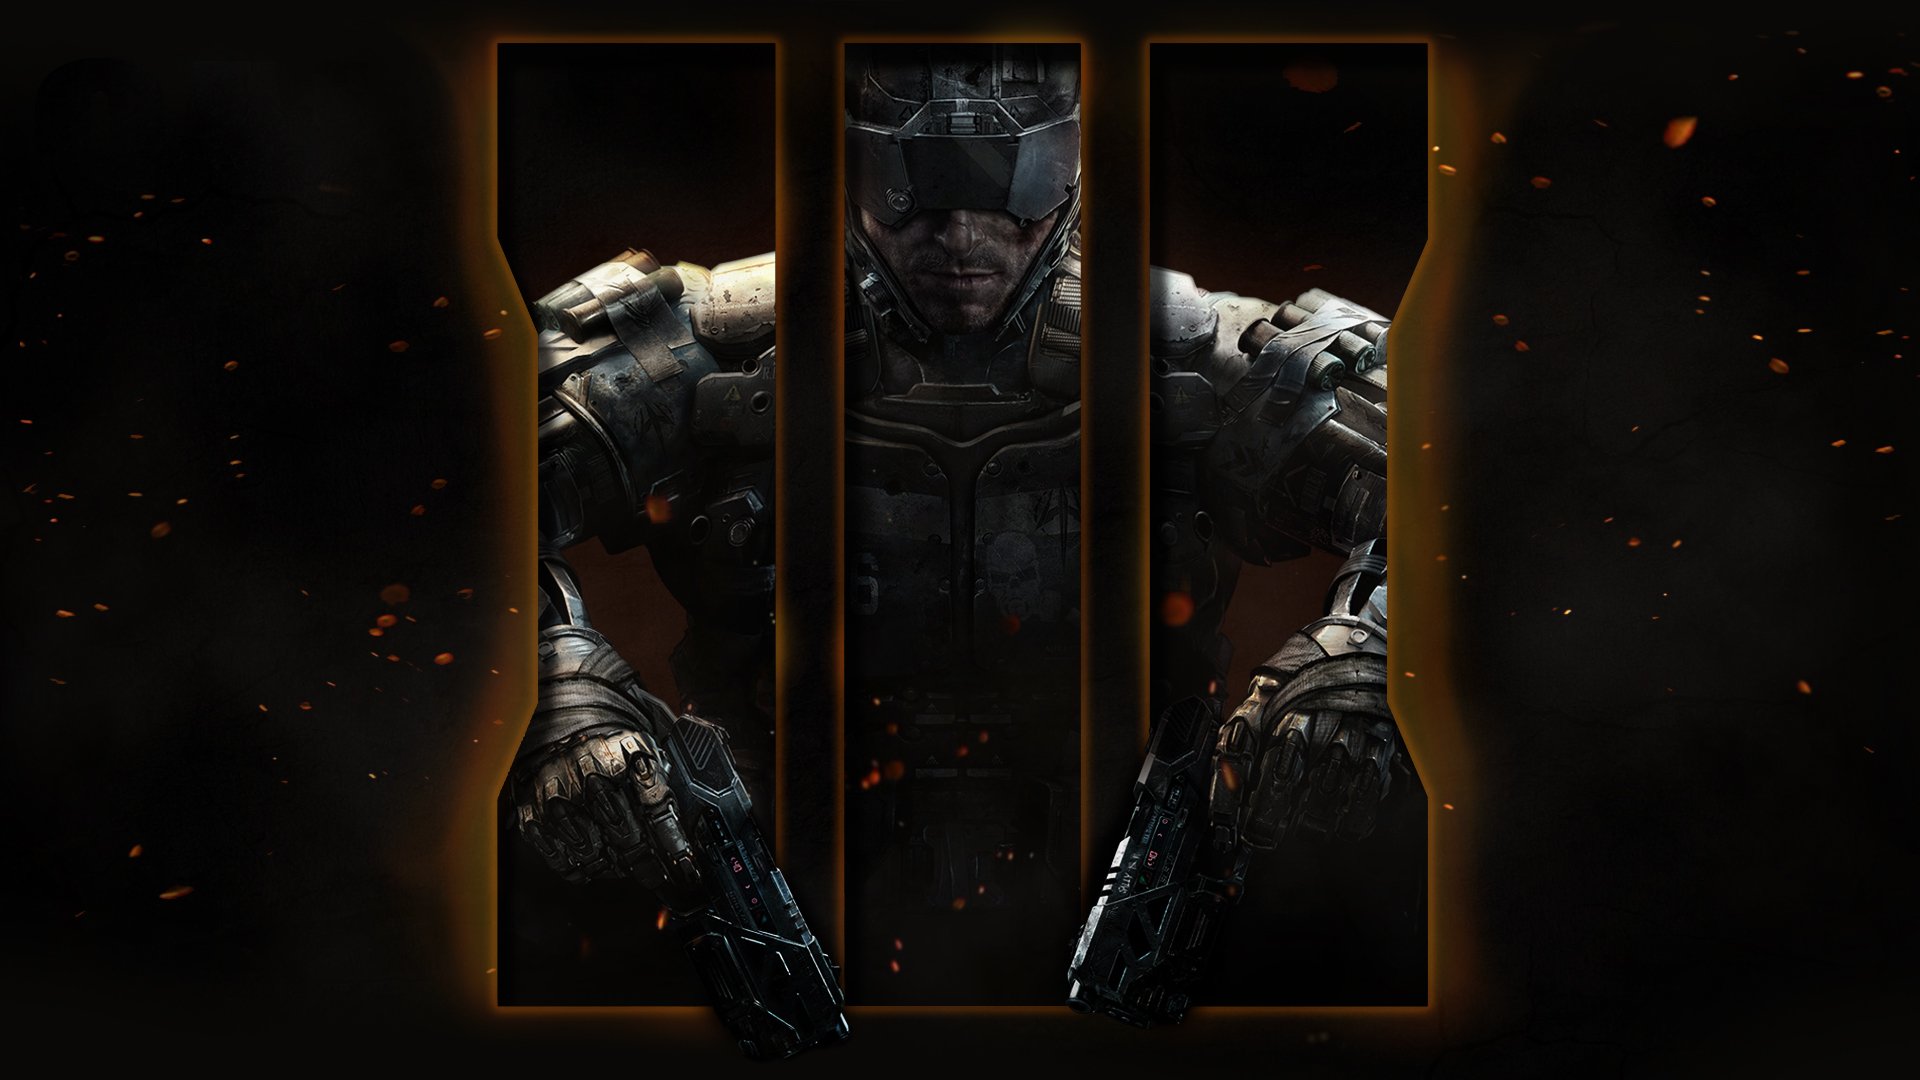 Call of Duty Black Ops 3 Wallpaper 04 by Toby Affenbude 1920x1080